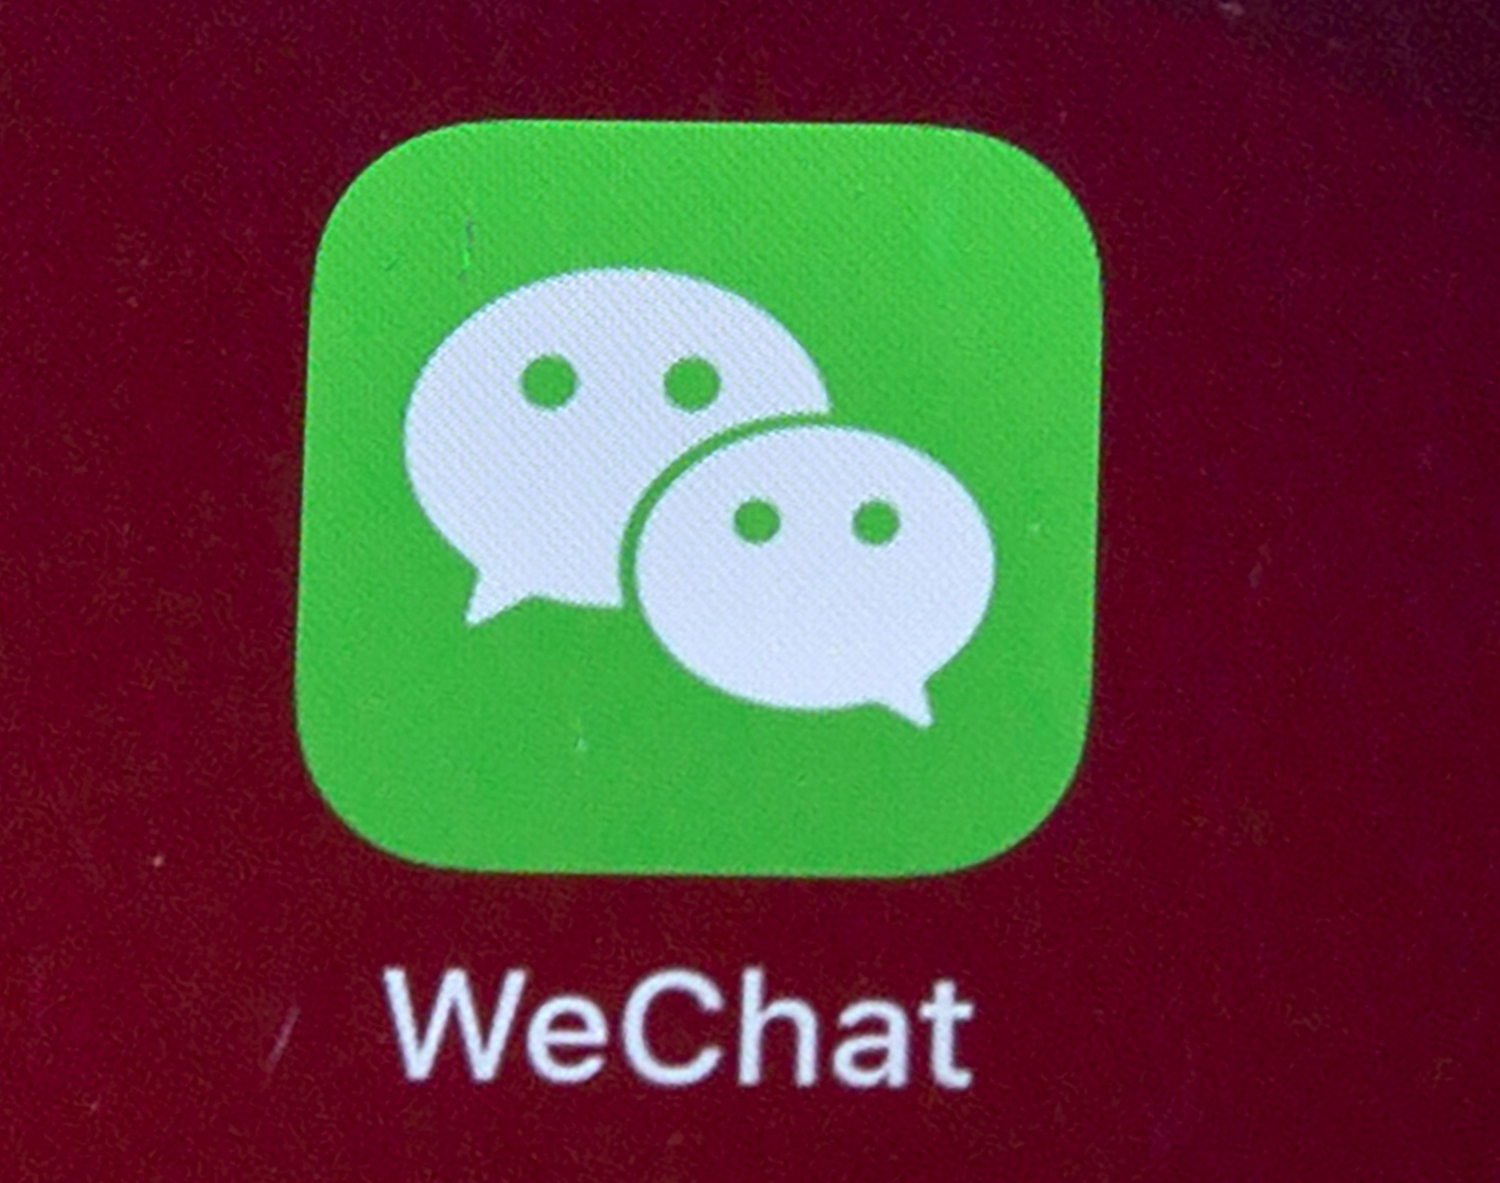 In this Aug. 7, 2020, file photo, icons for the smartphone app WeChat is seen on a smartphone screen in Beijing. China’s most popular social media service has deleted accounts on LGBT topics run by university students and nongovernment groups, prompting concern the ruling Communist Party is tightening control over gay and lesbian content. (AP Photo/Mark Schiefelbein, File)